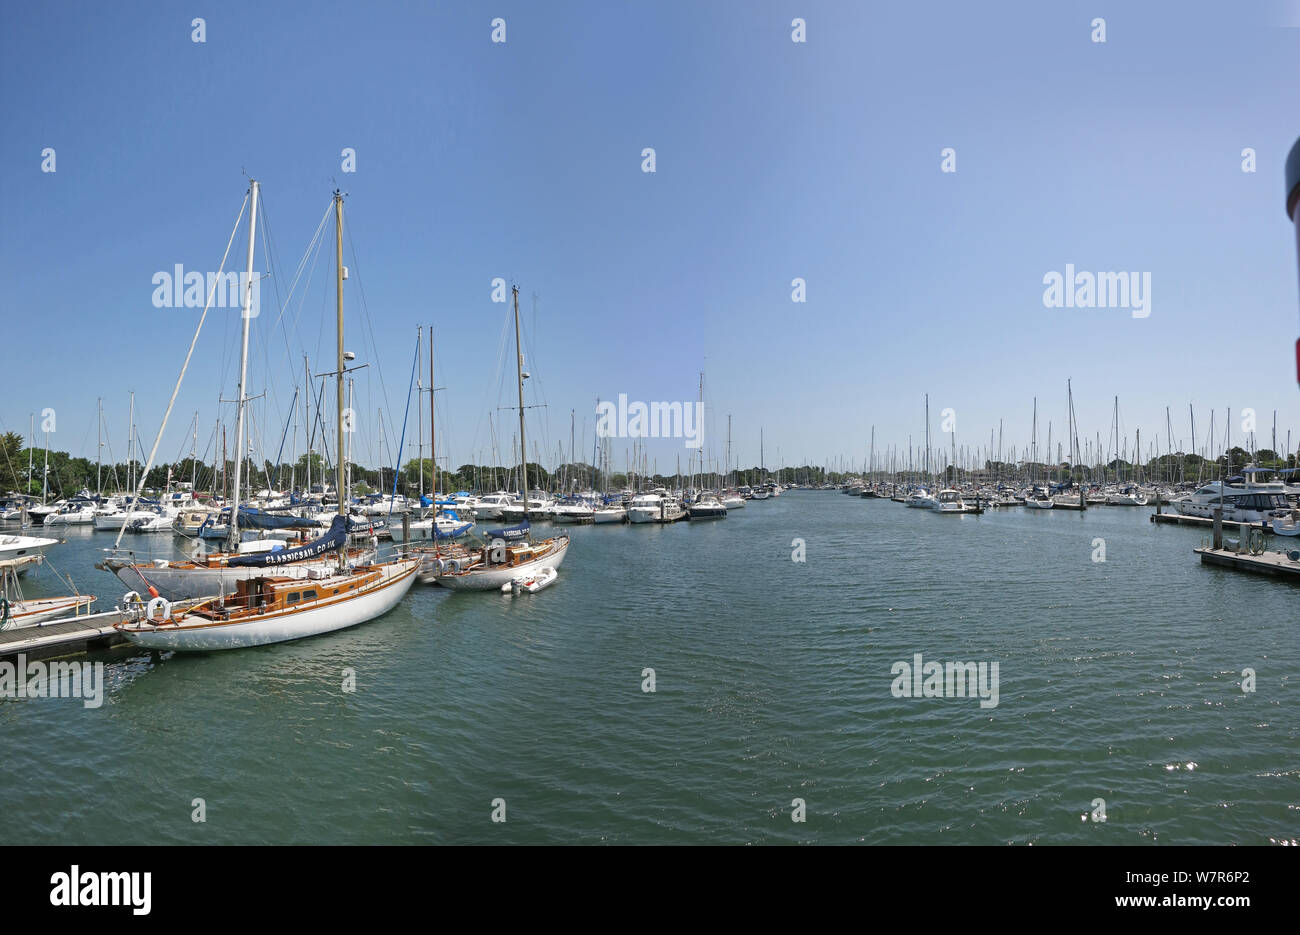 Chichester Yacht Basin, a purpose-built marina on Chichester Harbour, West Sussex, UK. Shows vintage yachts (left), main channel and mooring pontoons. Stock Photo